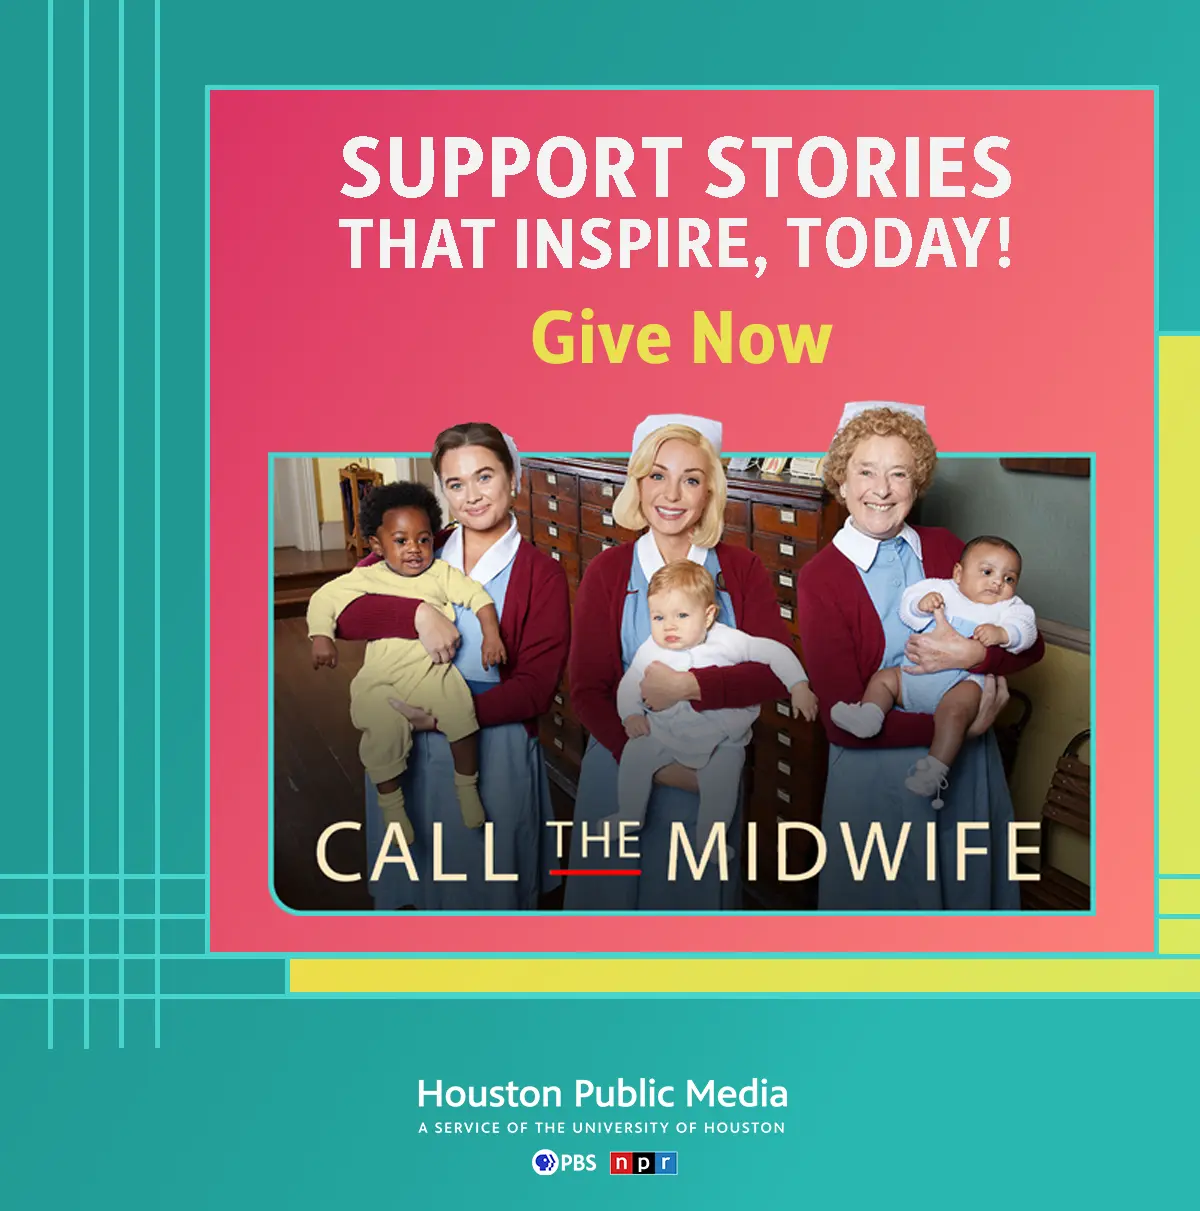 Support stories that inspire, today! Give now